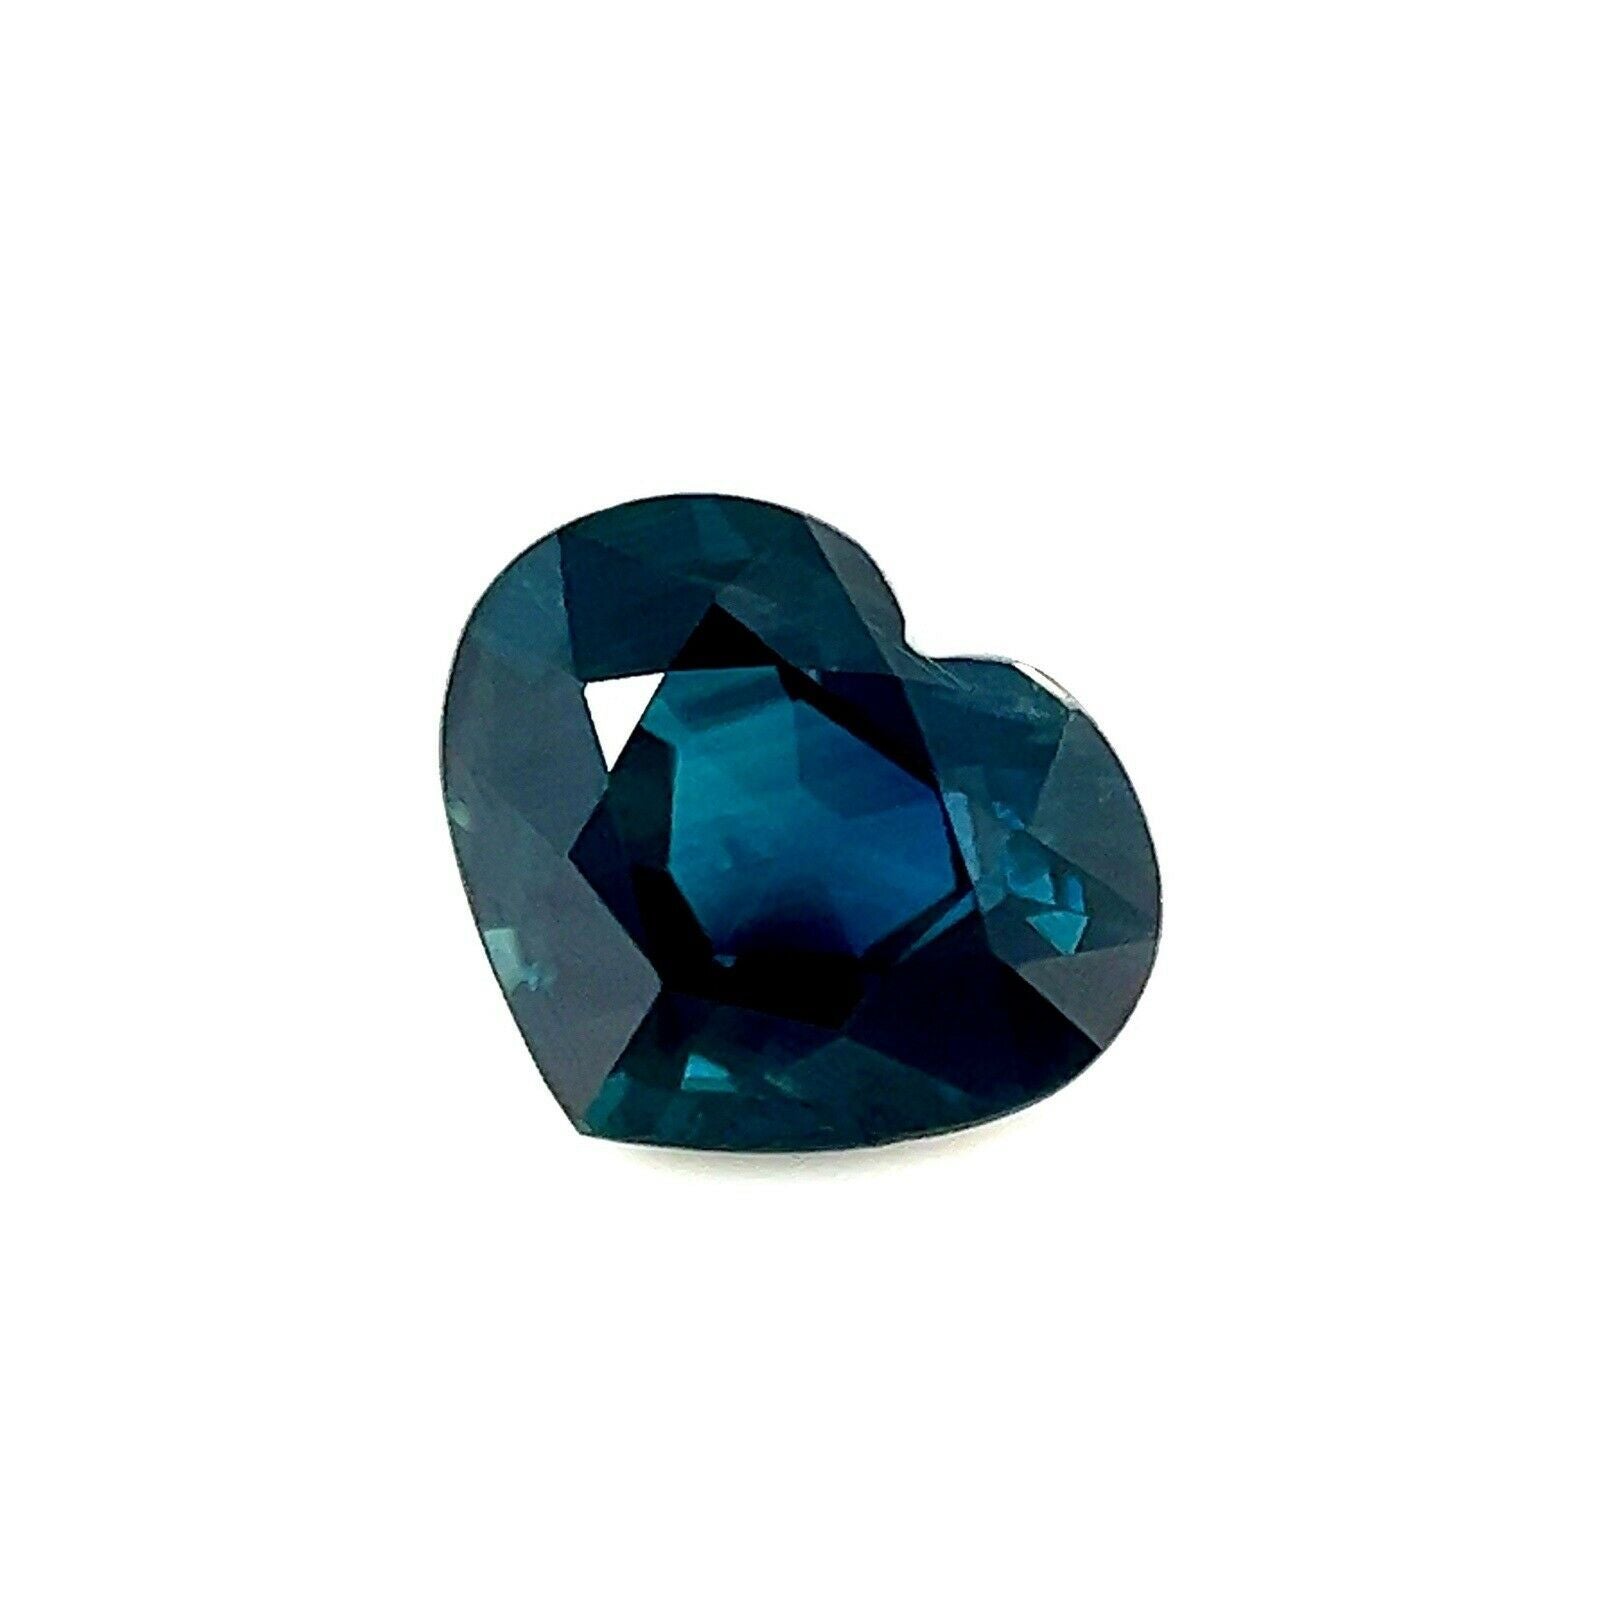 GRA Certified 1.17ct Blue Sapphire Untreated Heart Cut Loose Rare Gem For Sale